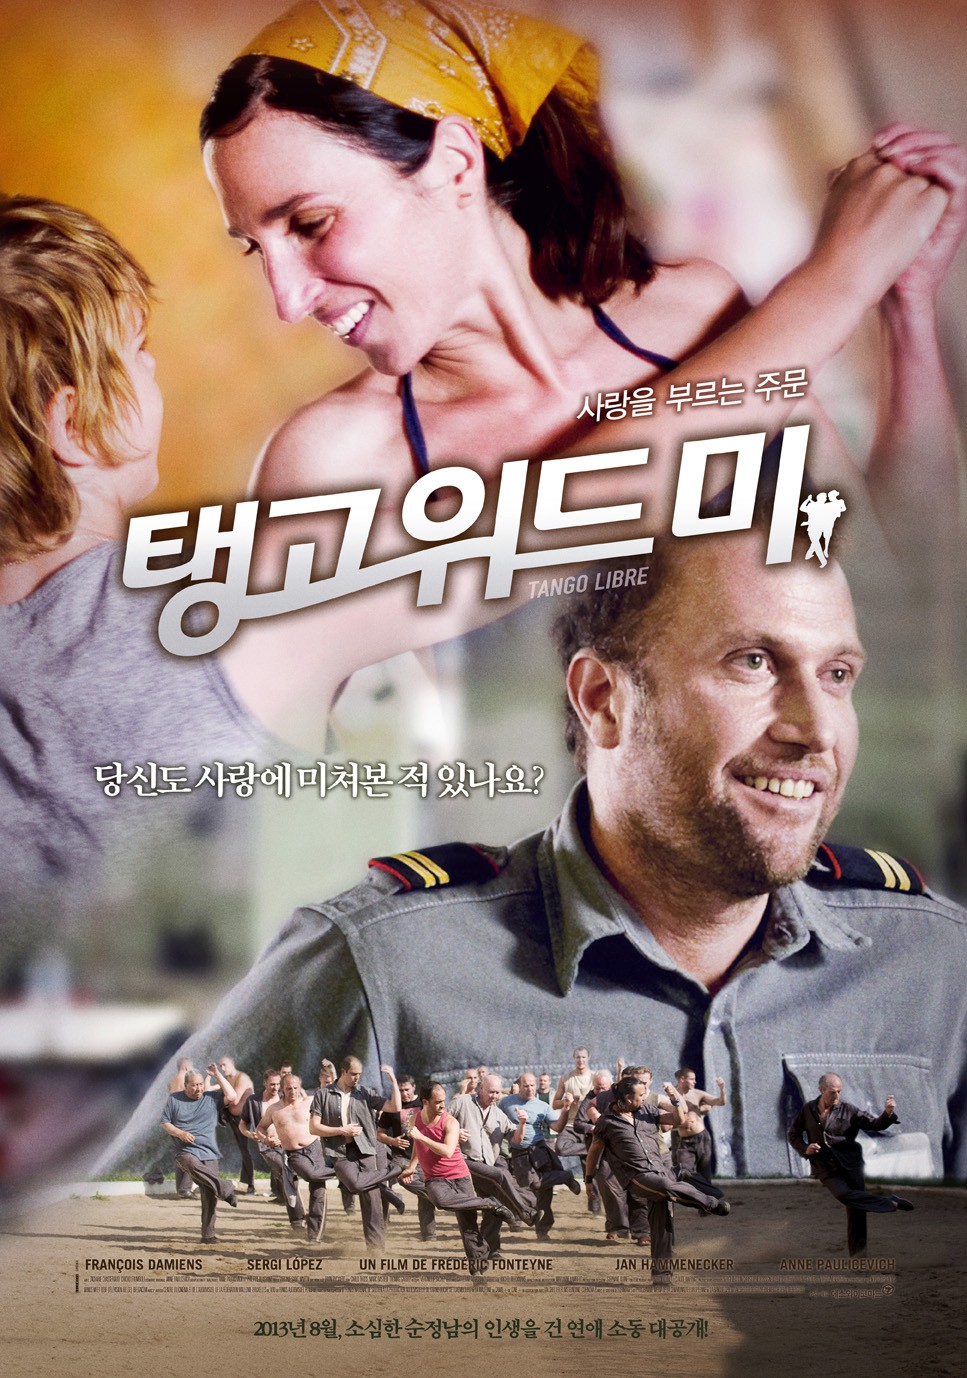 Extra Large Movie Poster Image for Tango libre (#4 of 4)